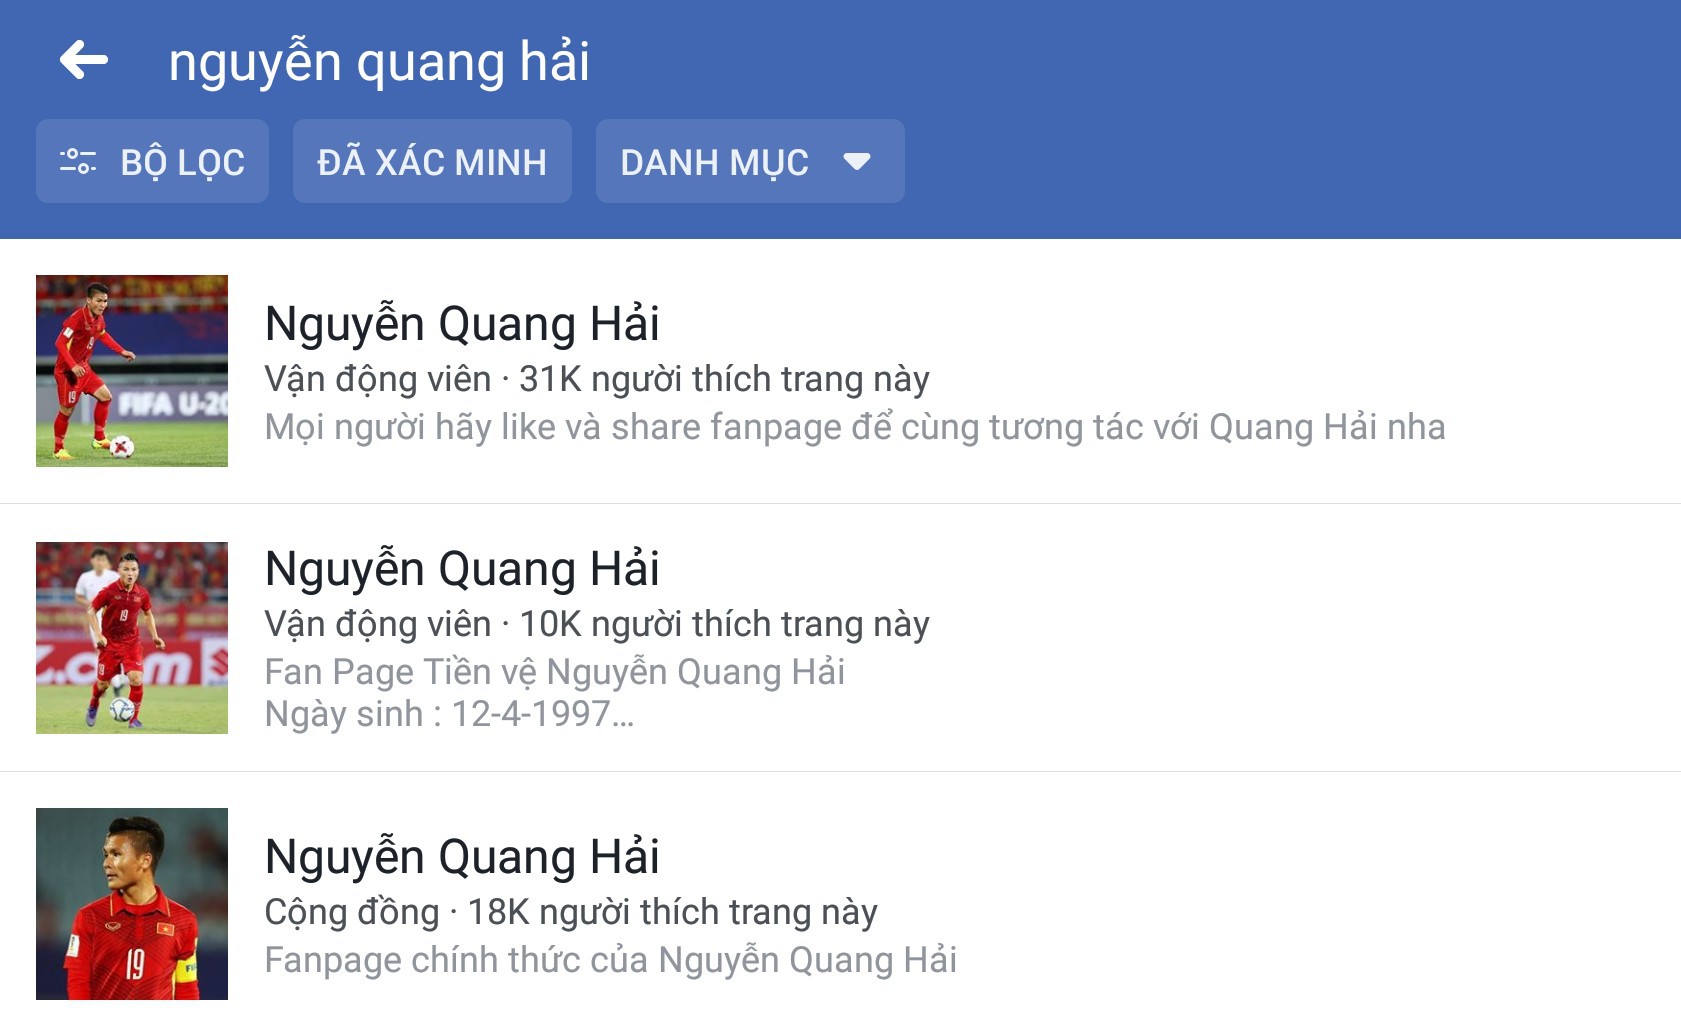 ​Cyber firm warns of fake Facebook profiles posing as Vietnam’s football players